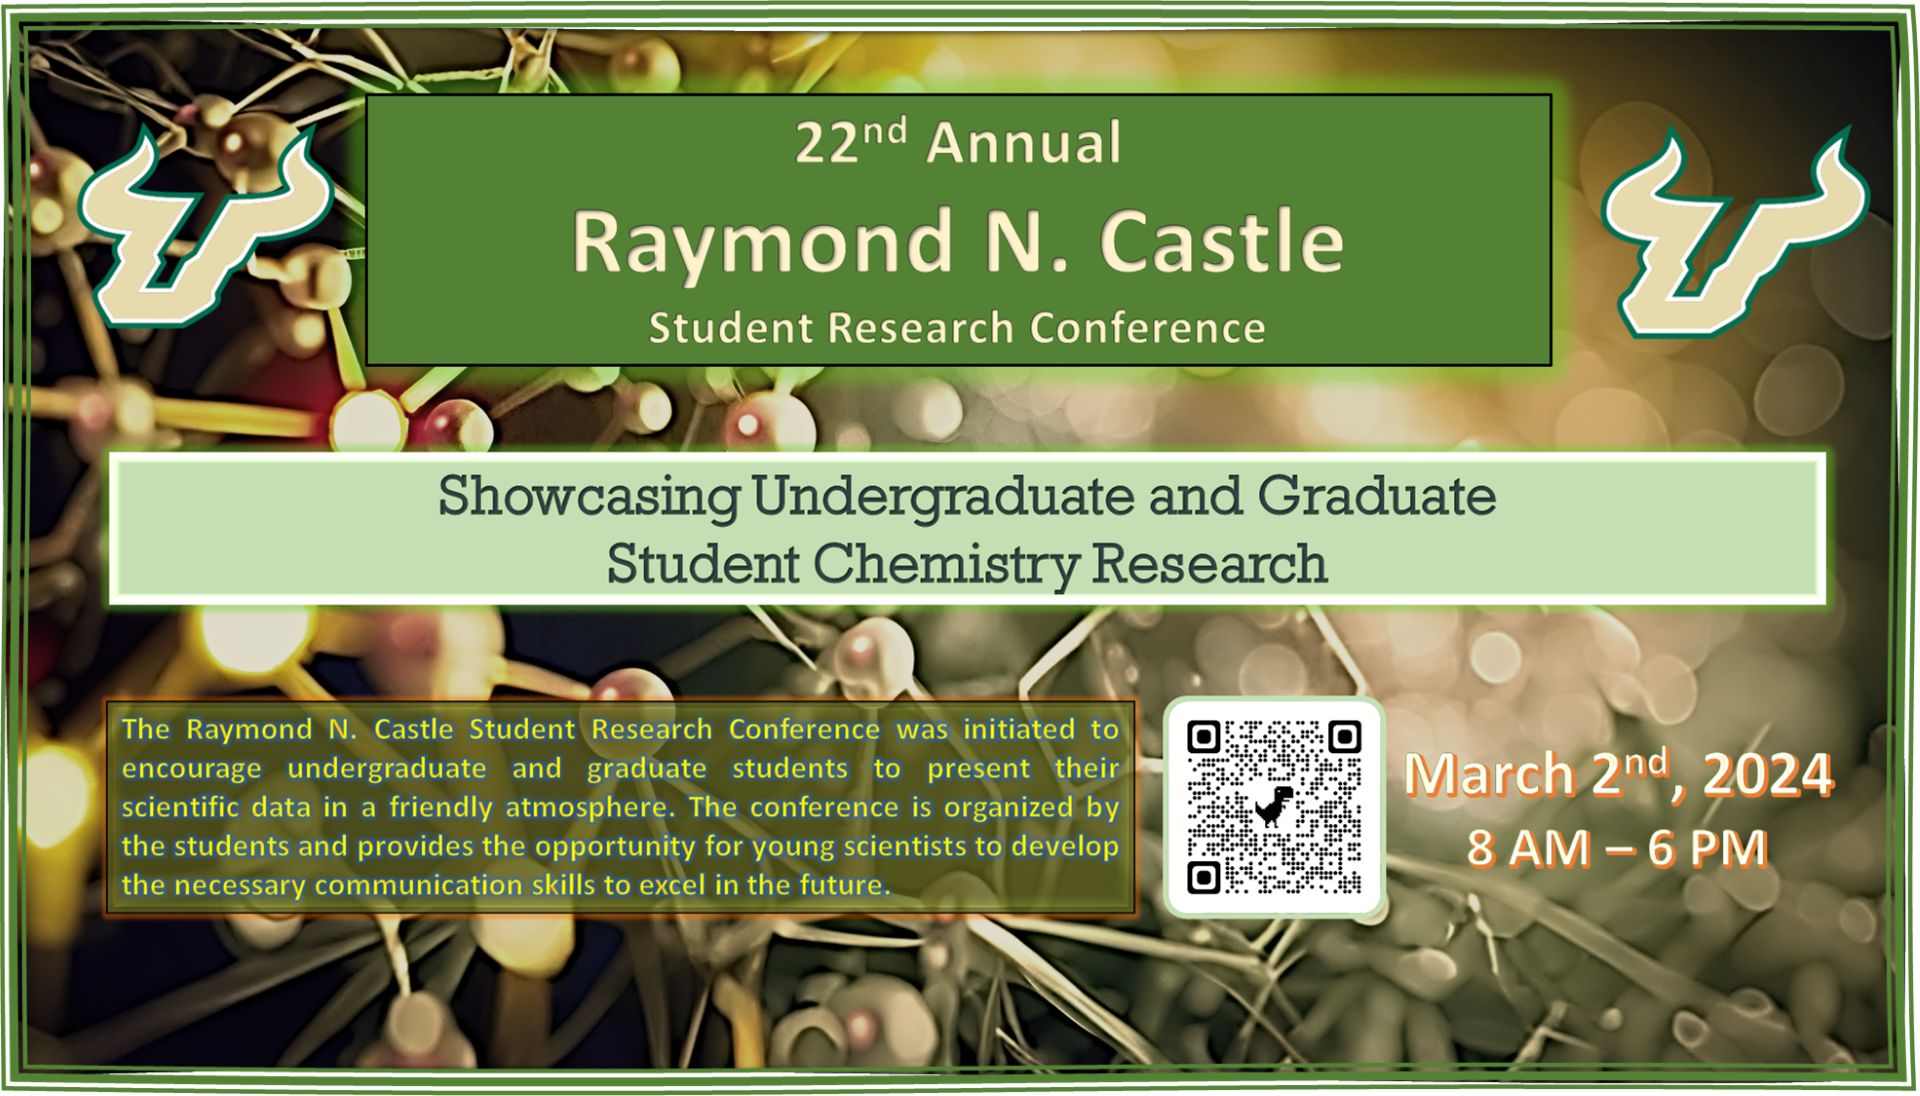 Raymond N. Castle conference flyer